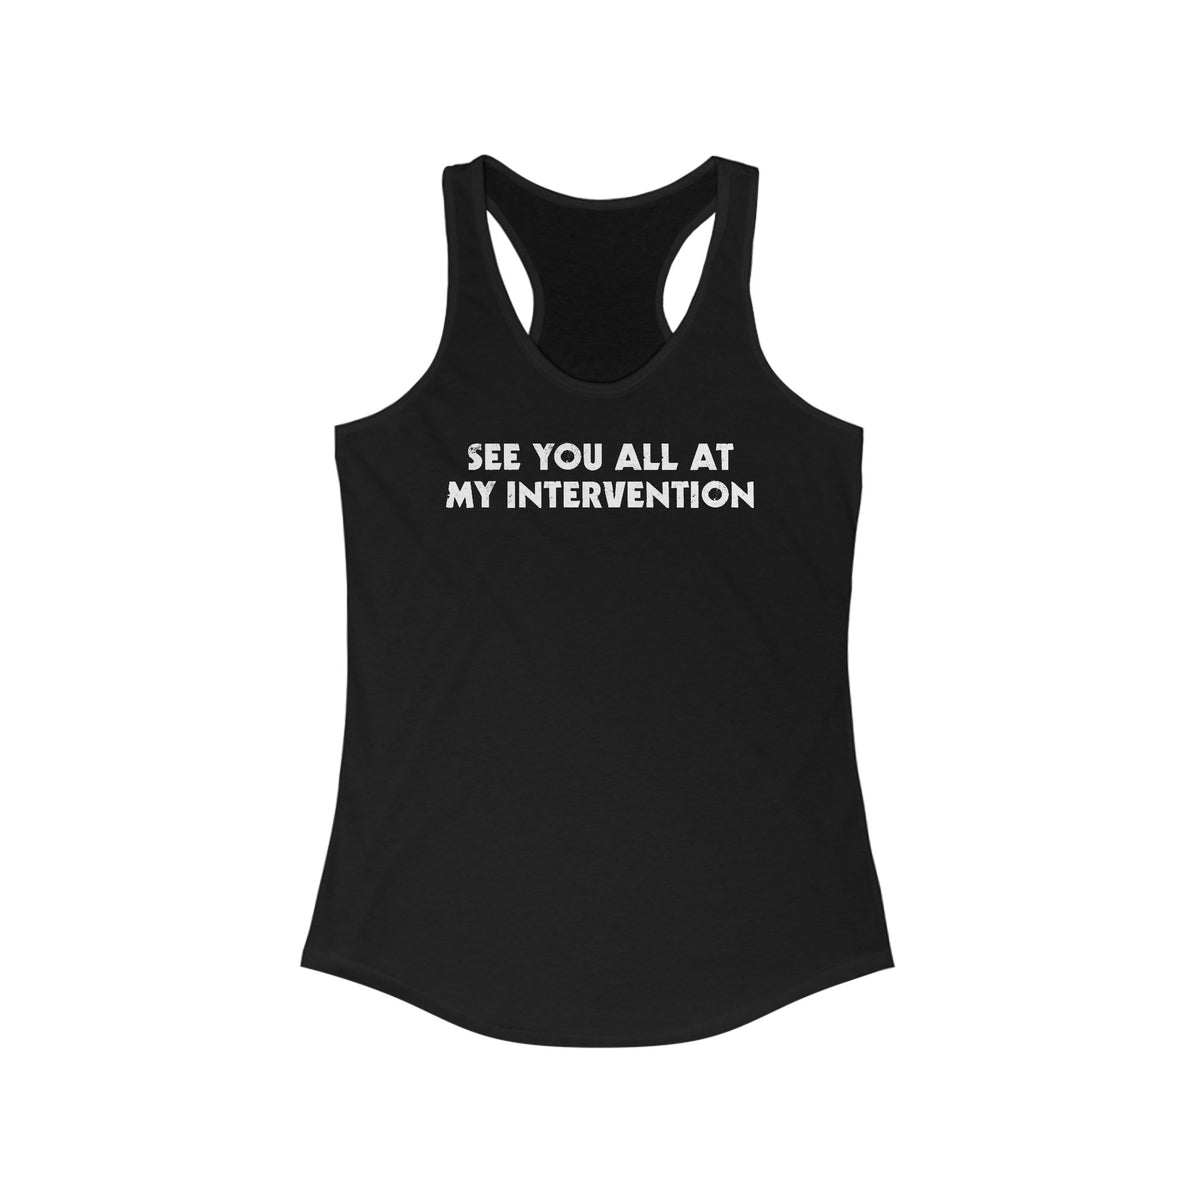 See You All At My Intervention - Women’s Racerback Tank